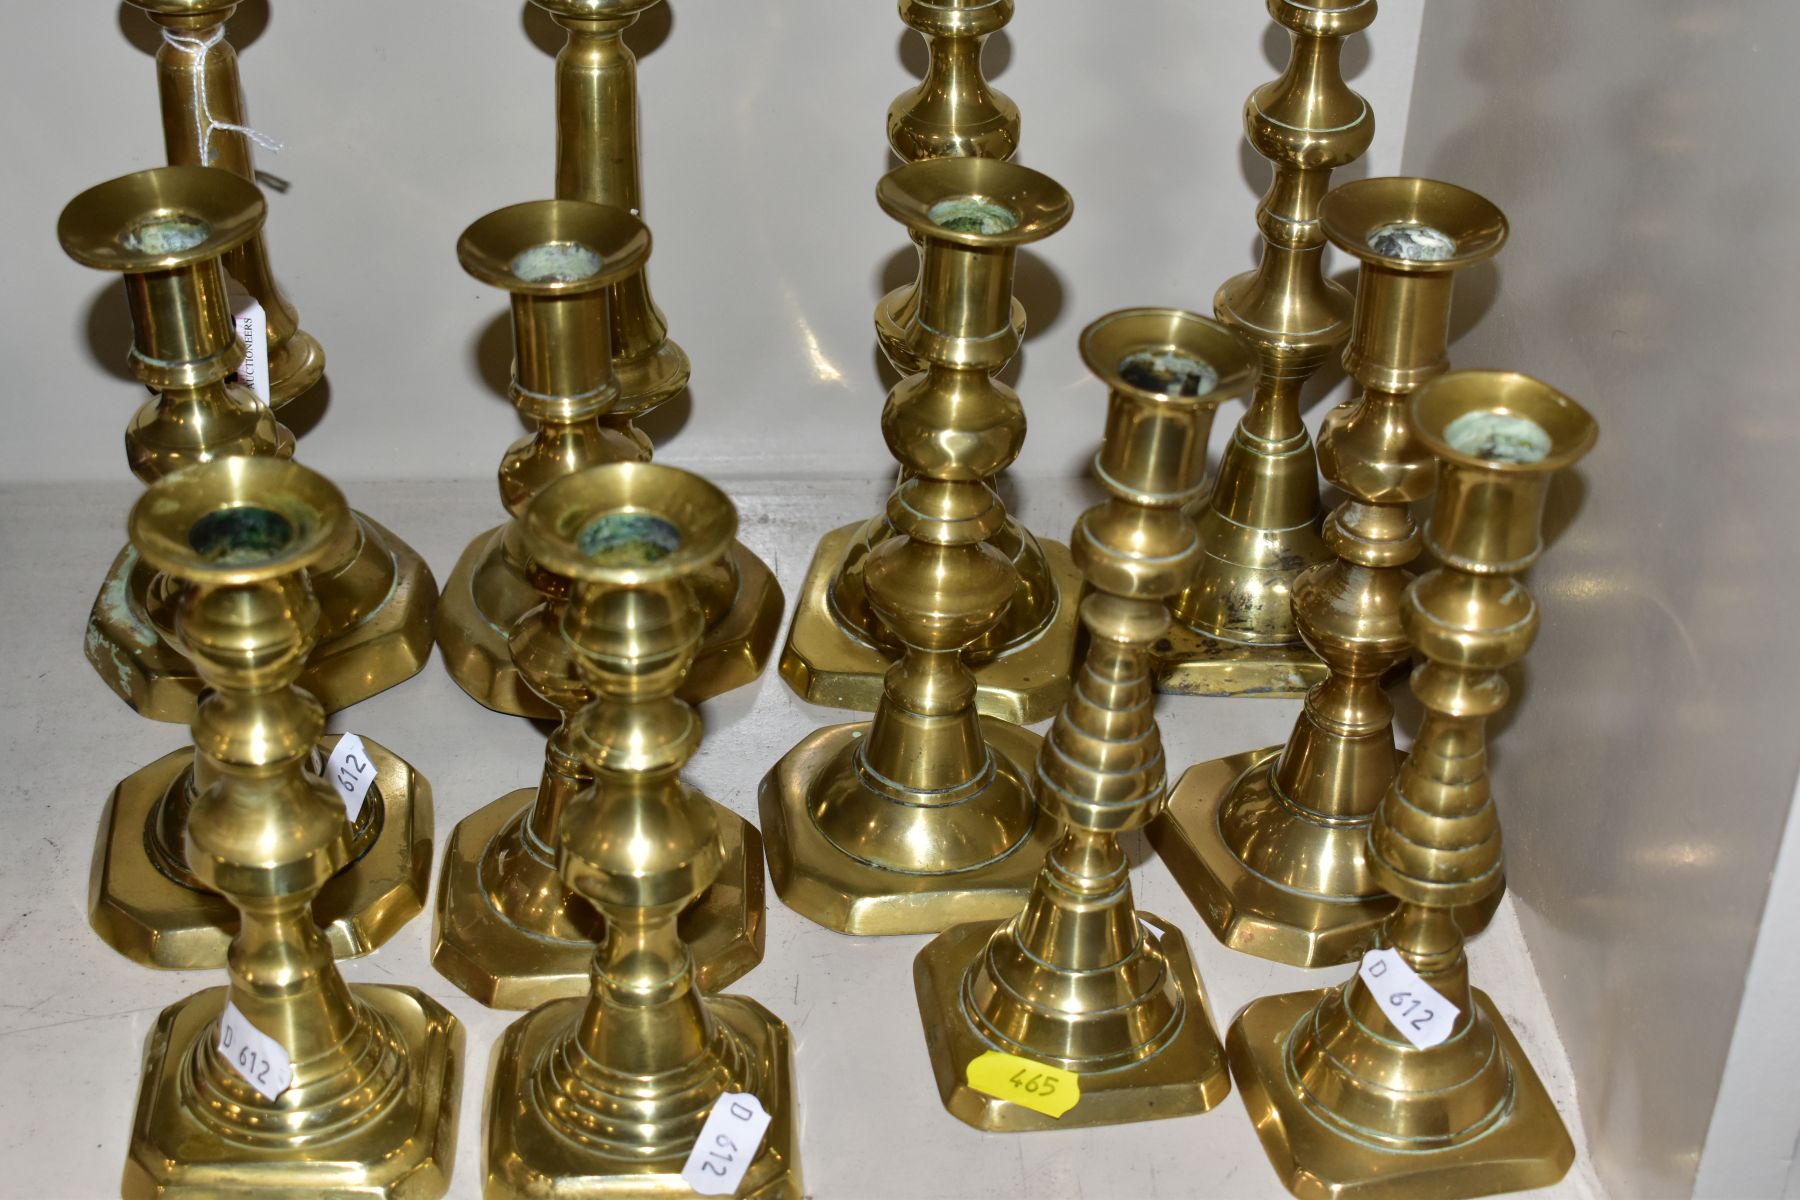 SIX PAIRS OF BRASS CANDLESTICKS, tallest height 22cm and smallest height 16cm, all fitted with - Image 5 of 5